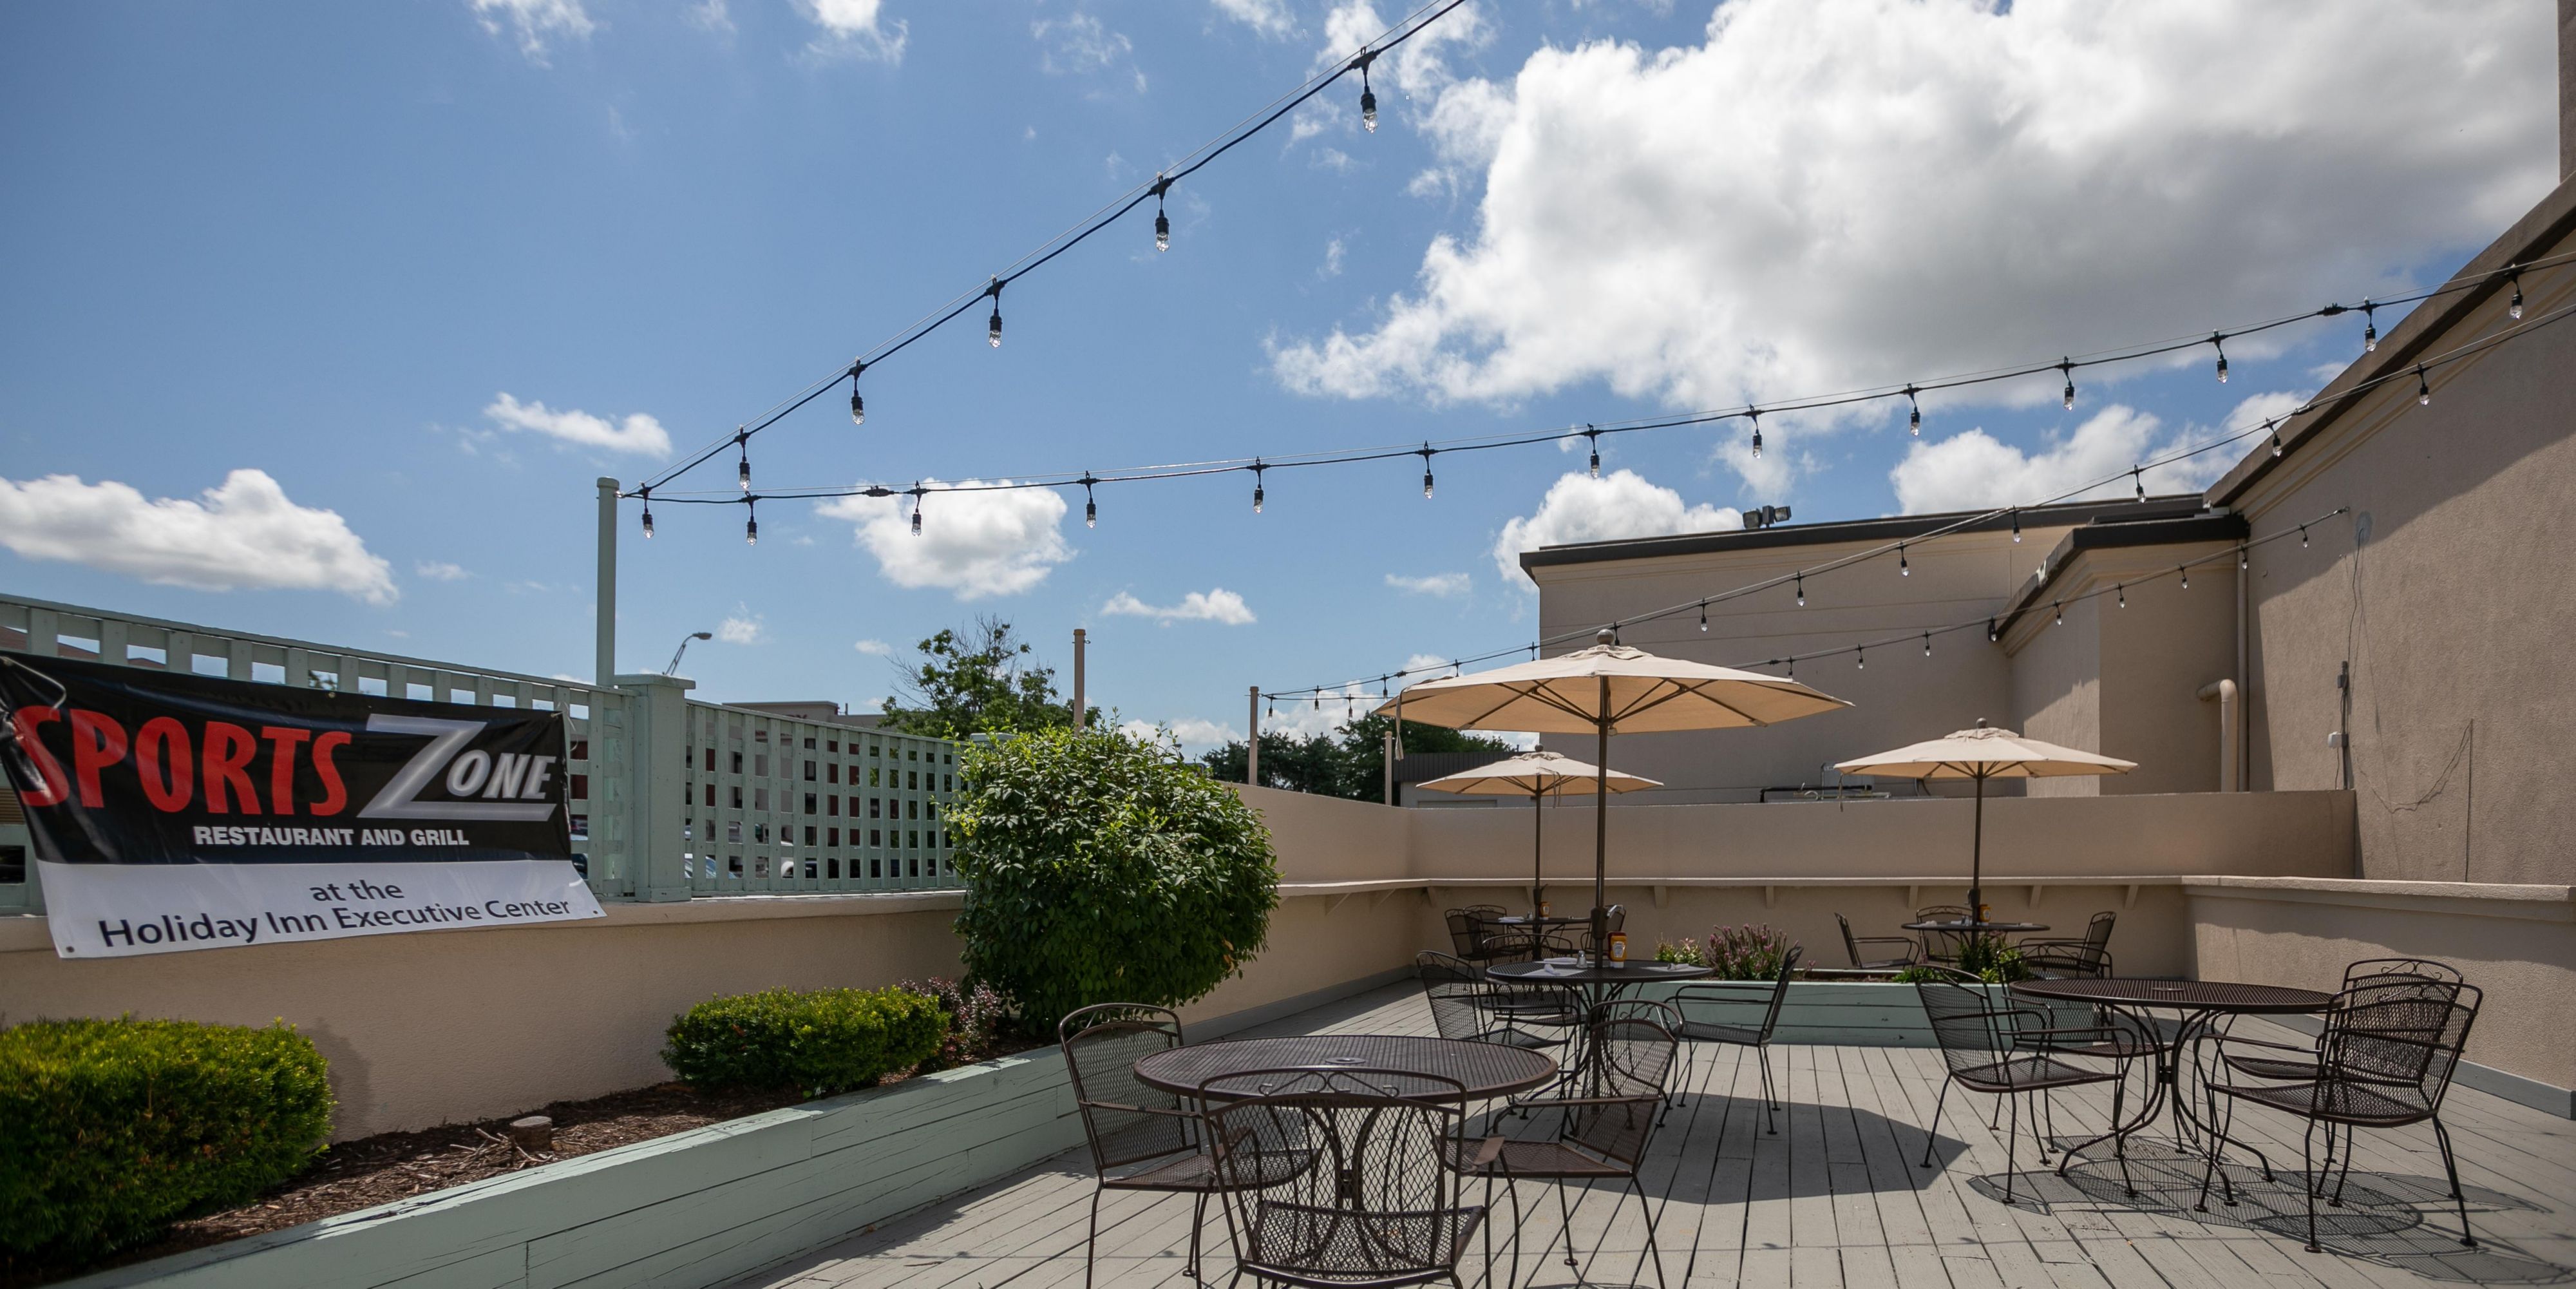 Get some fresh air on our outdoor patio.